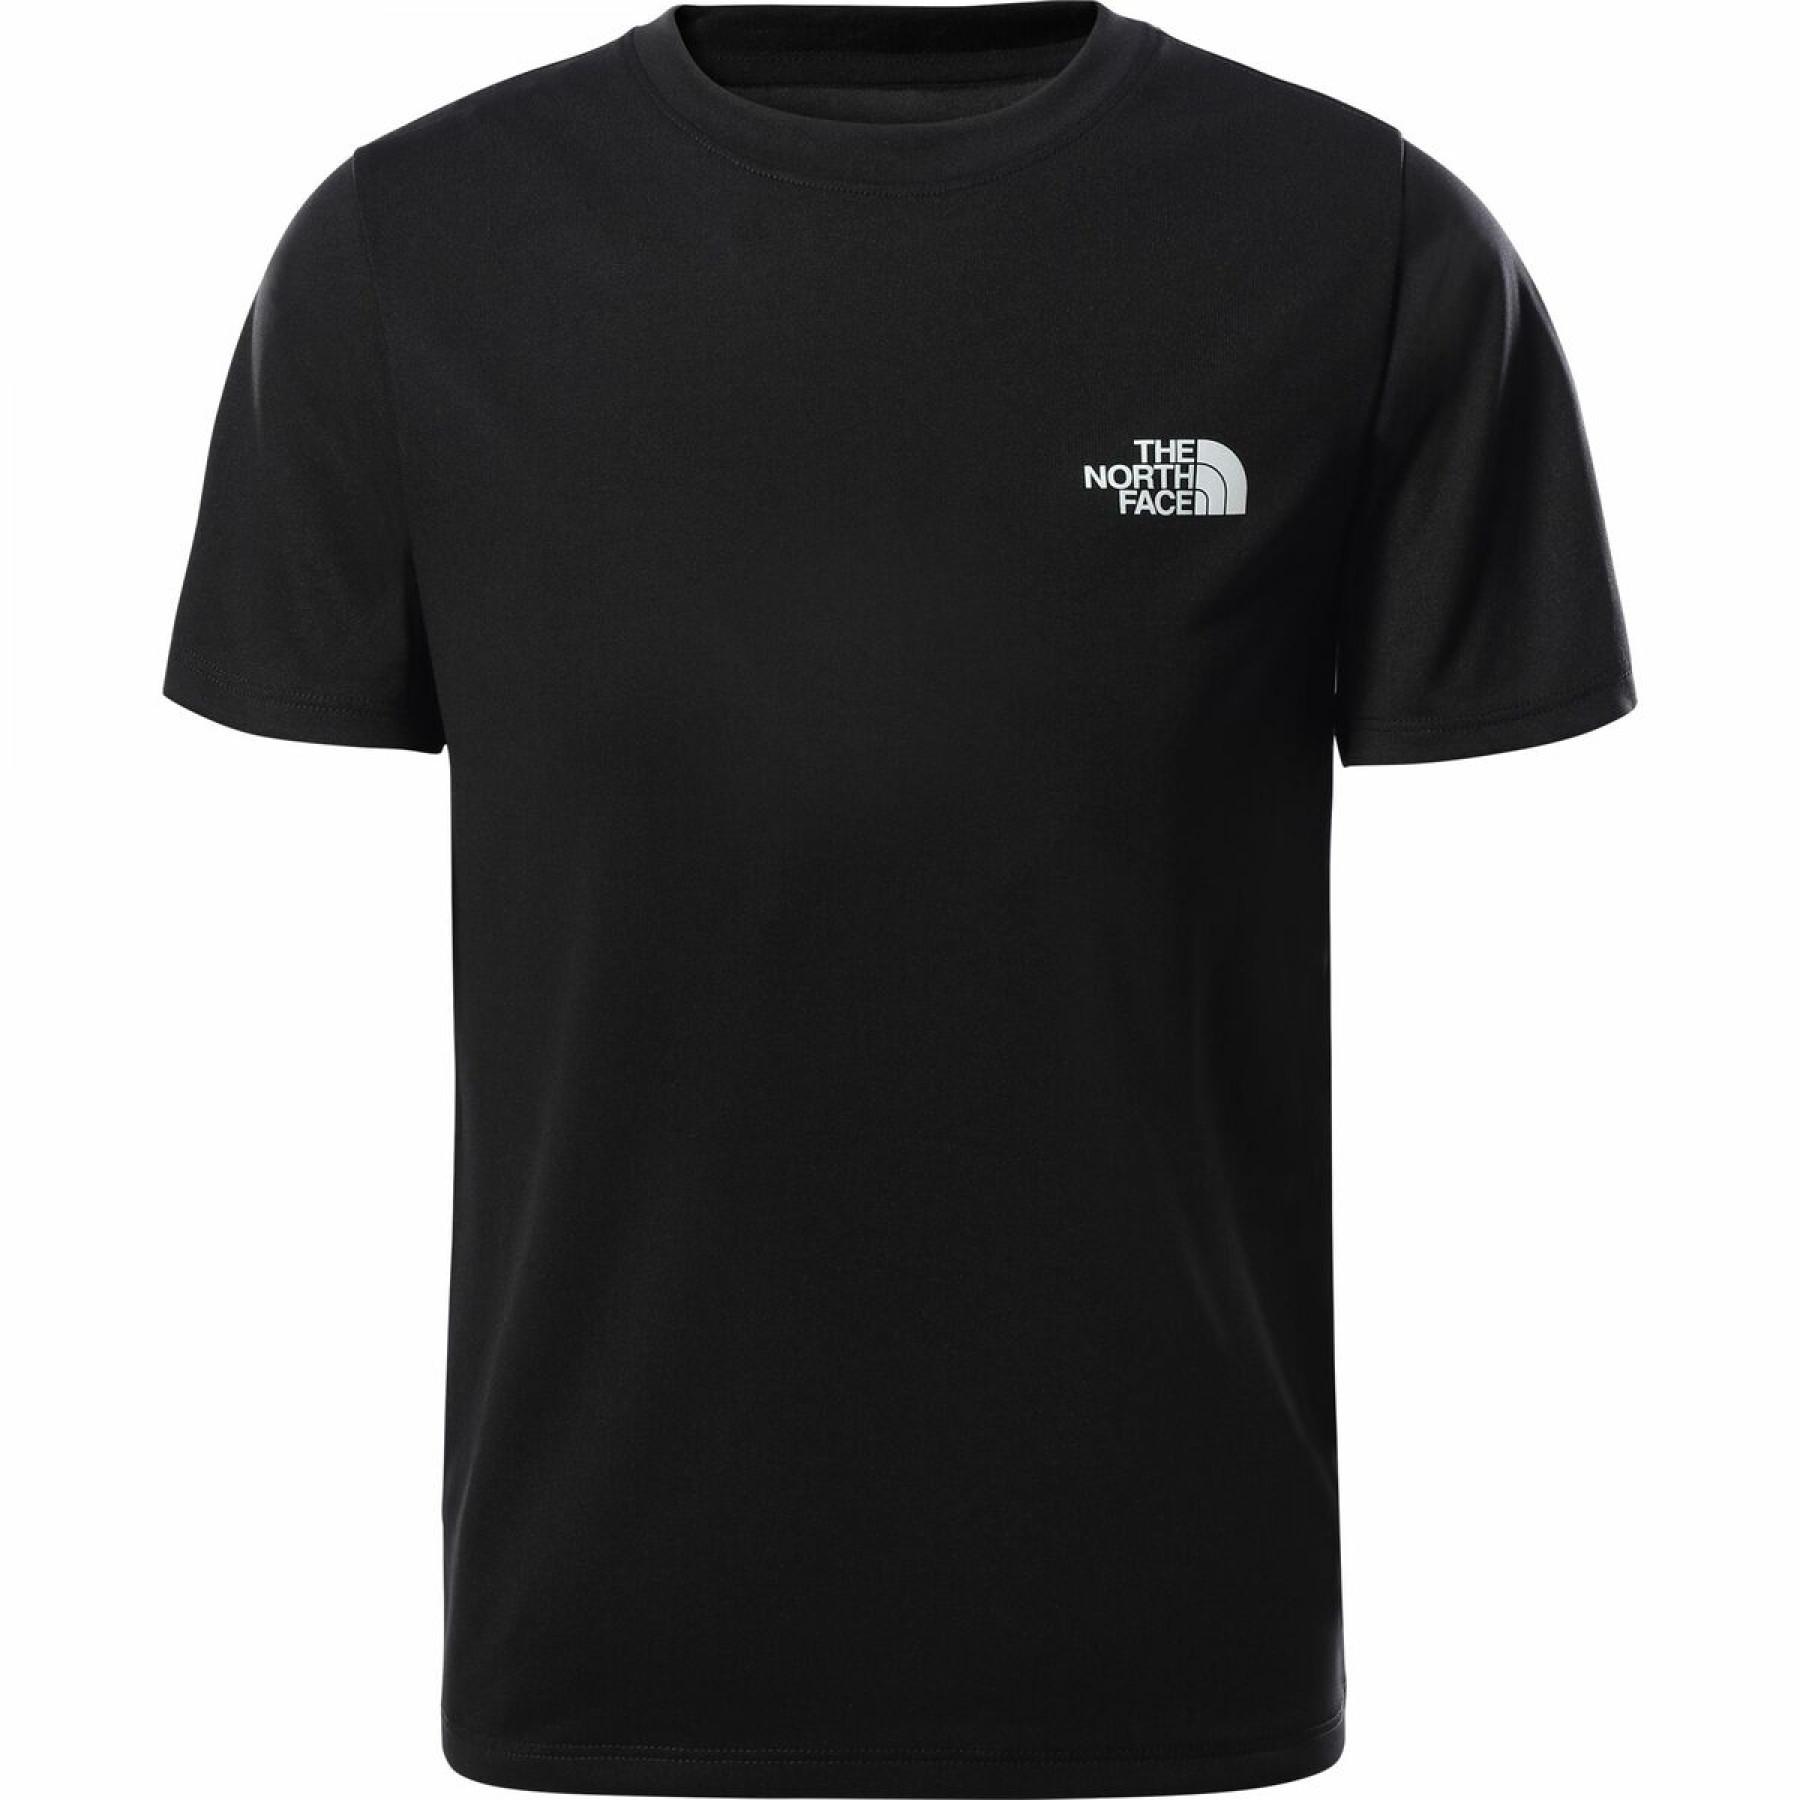 Kinder-T-Shirt The North Face Graphic